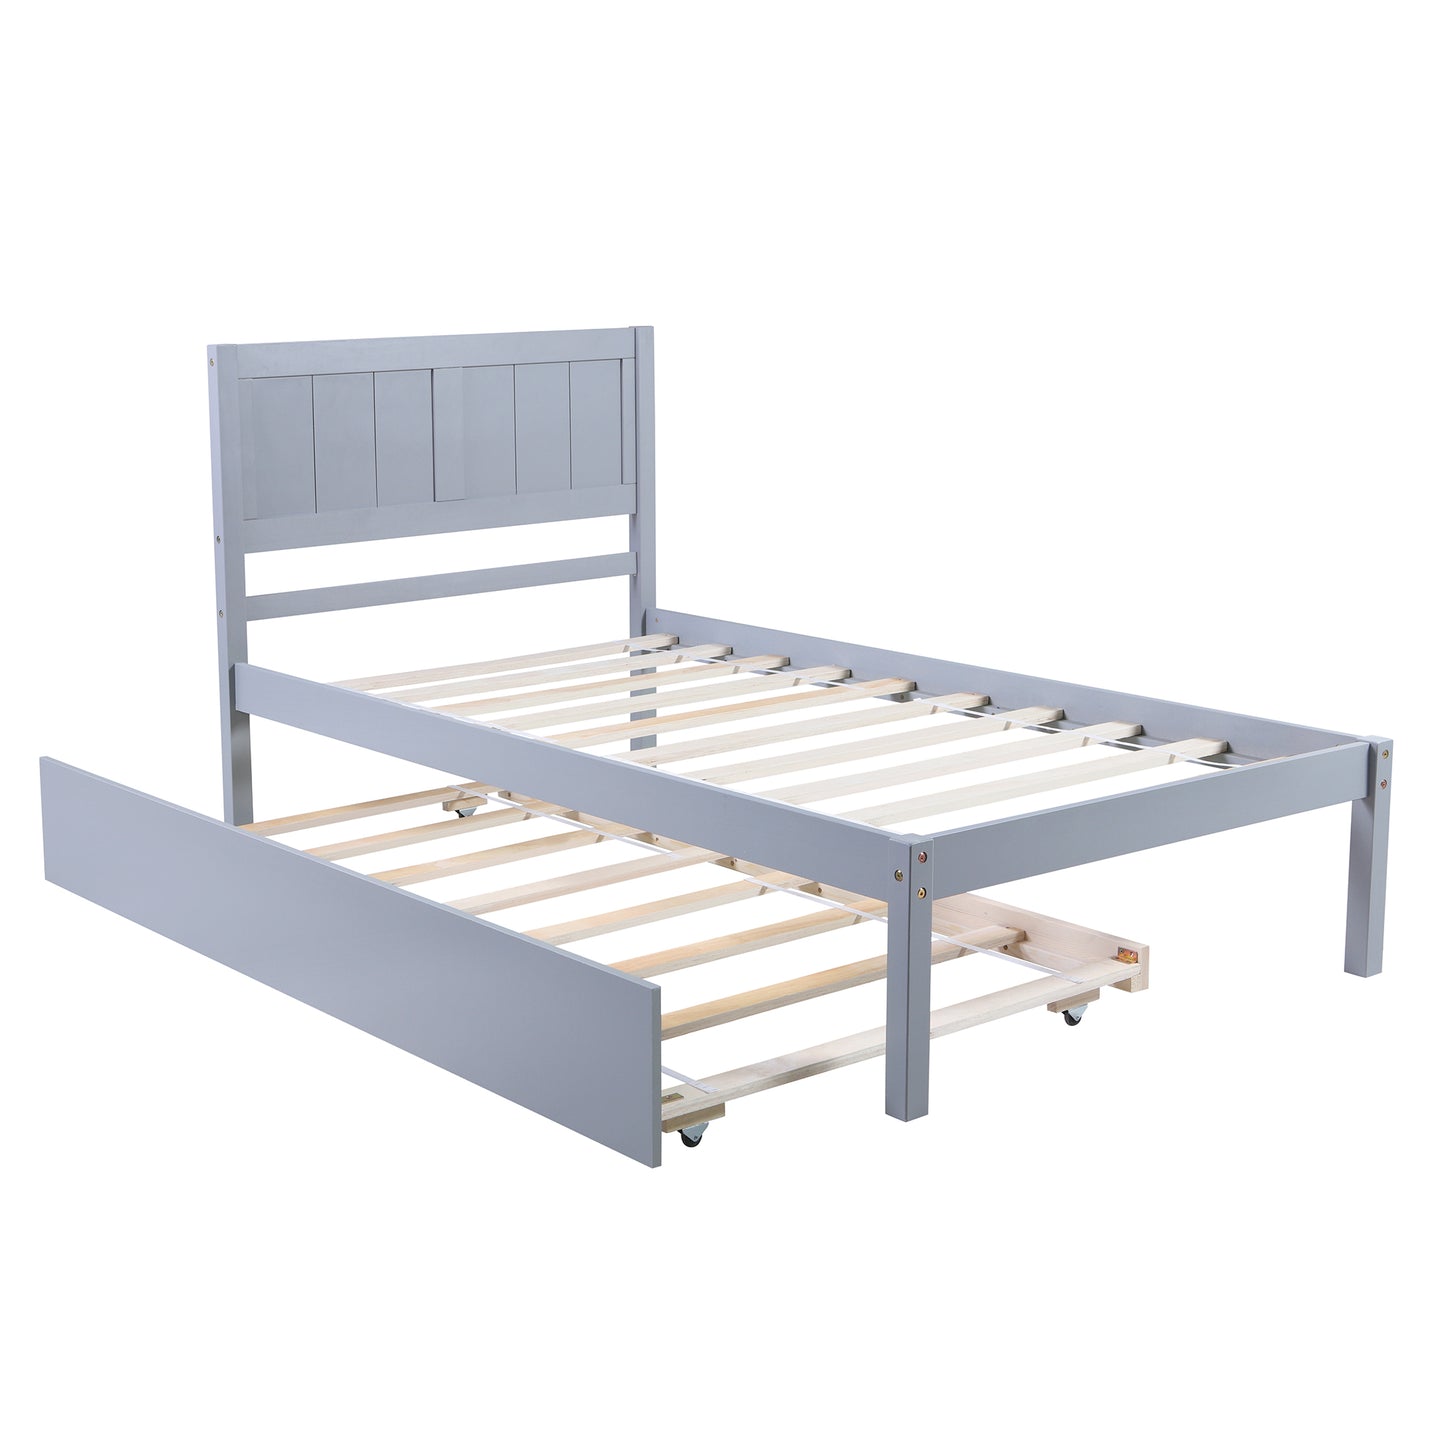 Solid Wood Trundle Bed, SYNGAR Platform Bed Frame with Headboard, Twin Size Daybed with Pop Up Trundle, Bunk Bed Alternative, No Box Spring Needed, for Teens Guests Sleepovers, K4053